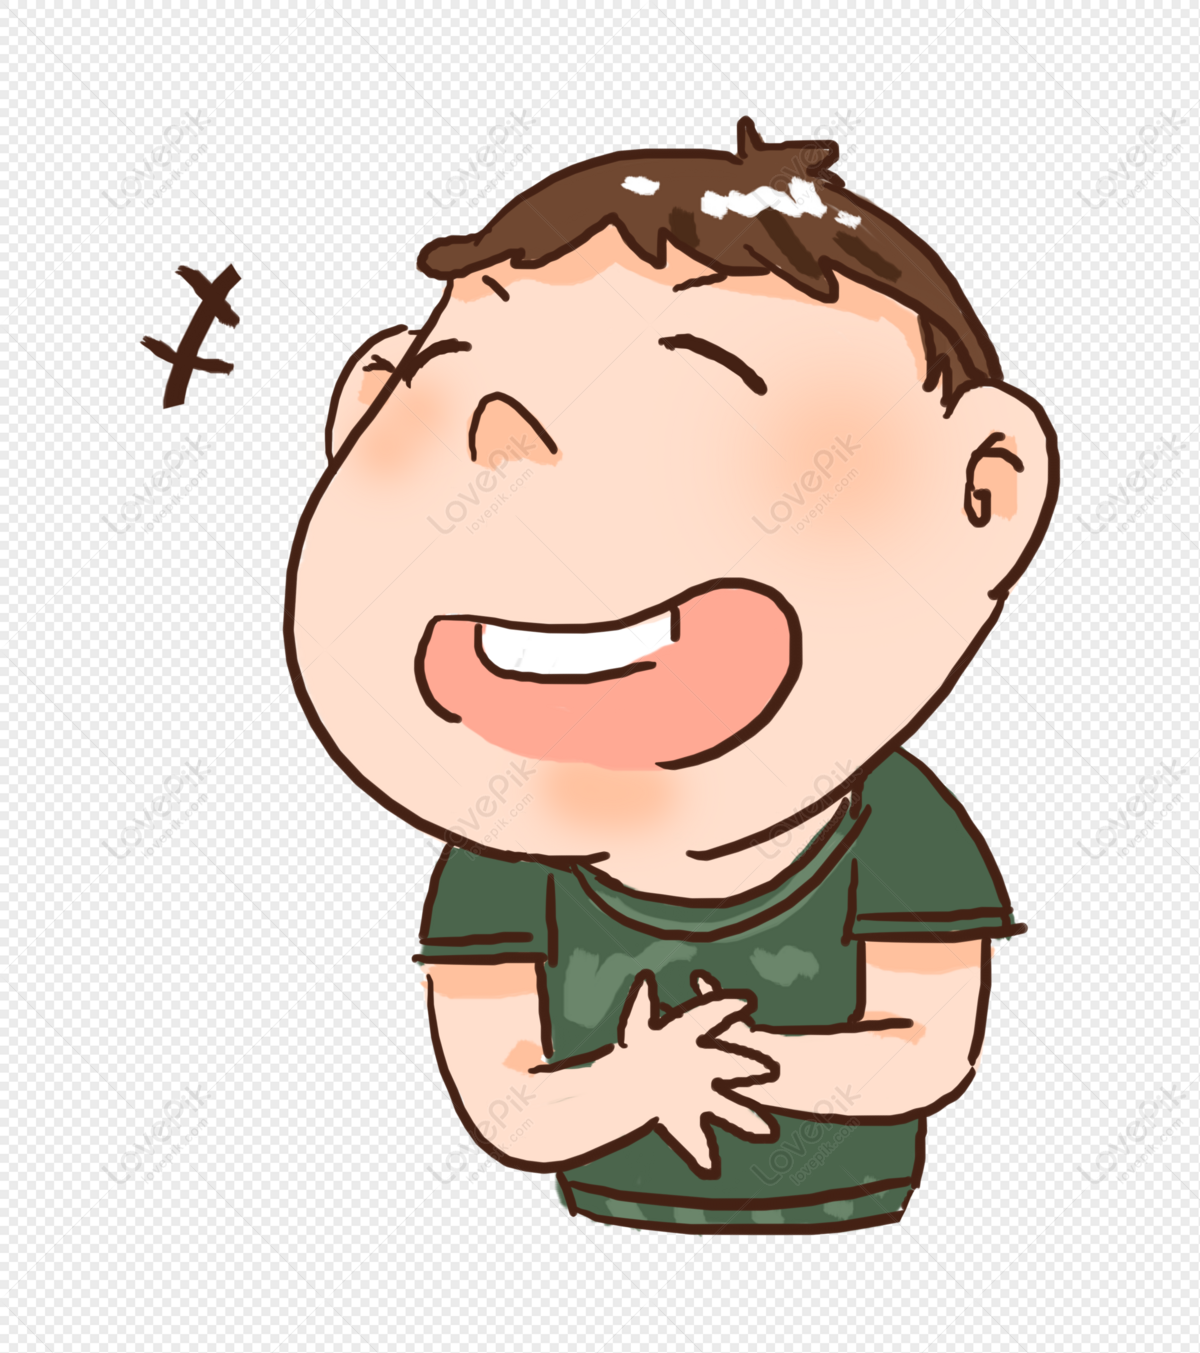 Laughing Illustration PNG Images With Transparent Background | Free ...